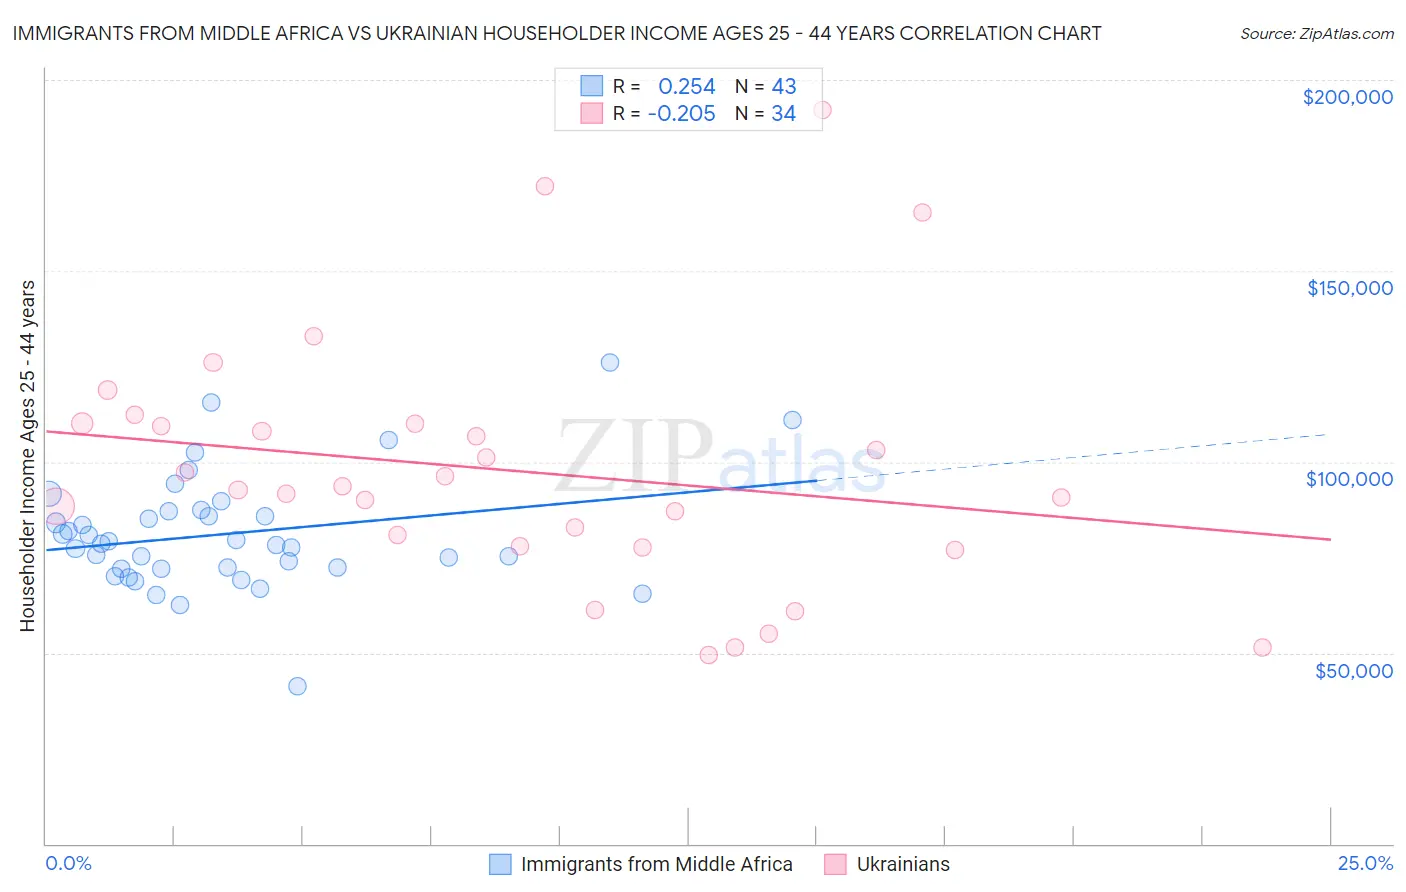 Immigrants from Middle Africa vs Ukrainian Householder Income Ages 25 - 44 years